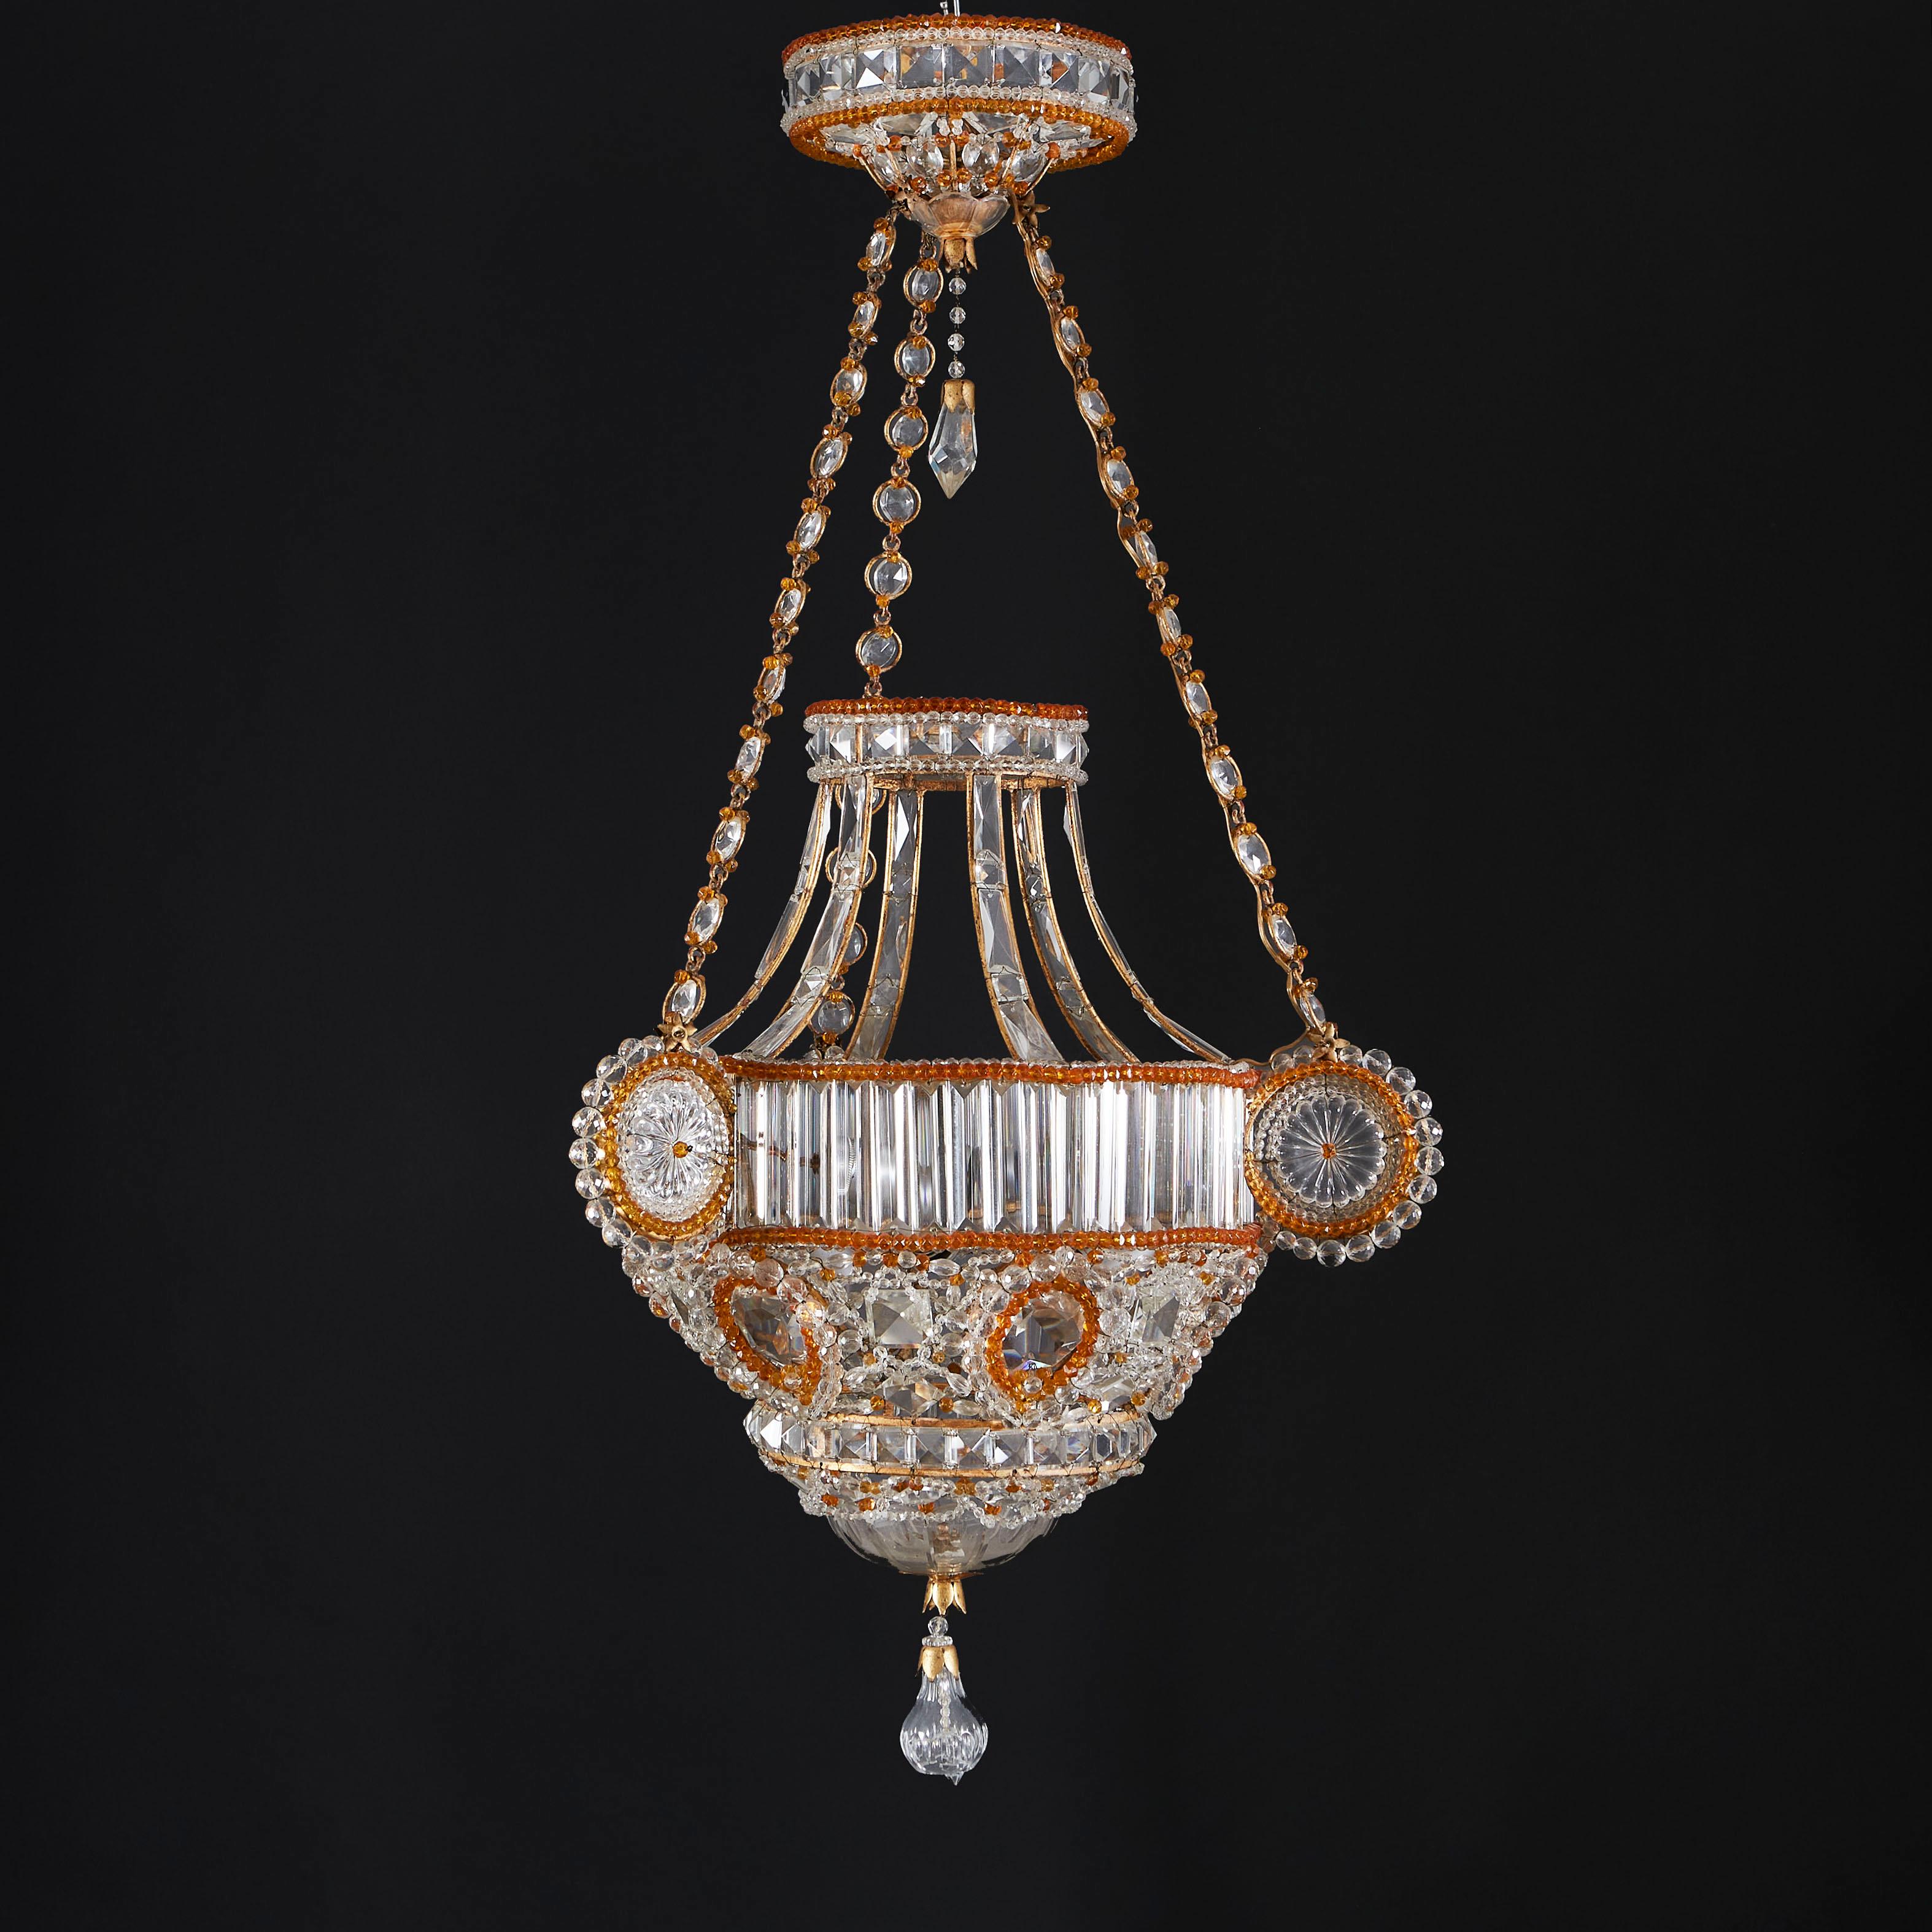 France, circa 1930.

An unusual early twentieth century hanging lantern decorated with amber glass and clear glass beads, with three exaggerated roundels and finely chased hanging chain. Attributed to Maison Bagues.

Height 108.00cm

Diameter 56.00cm